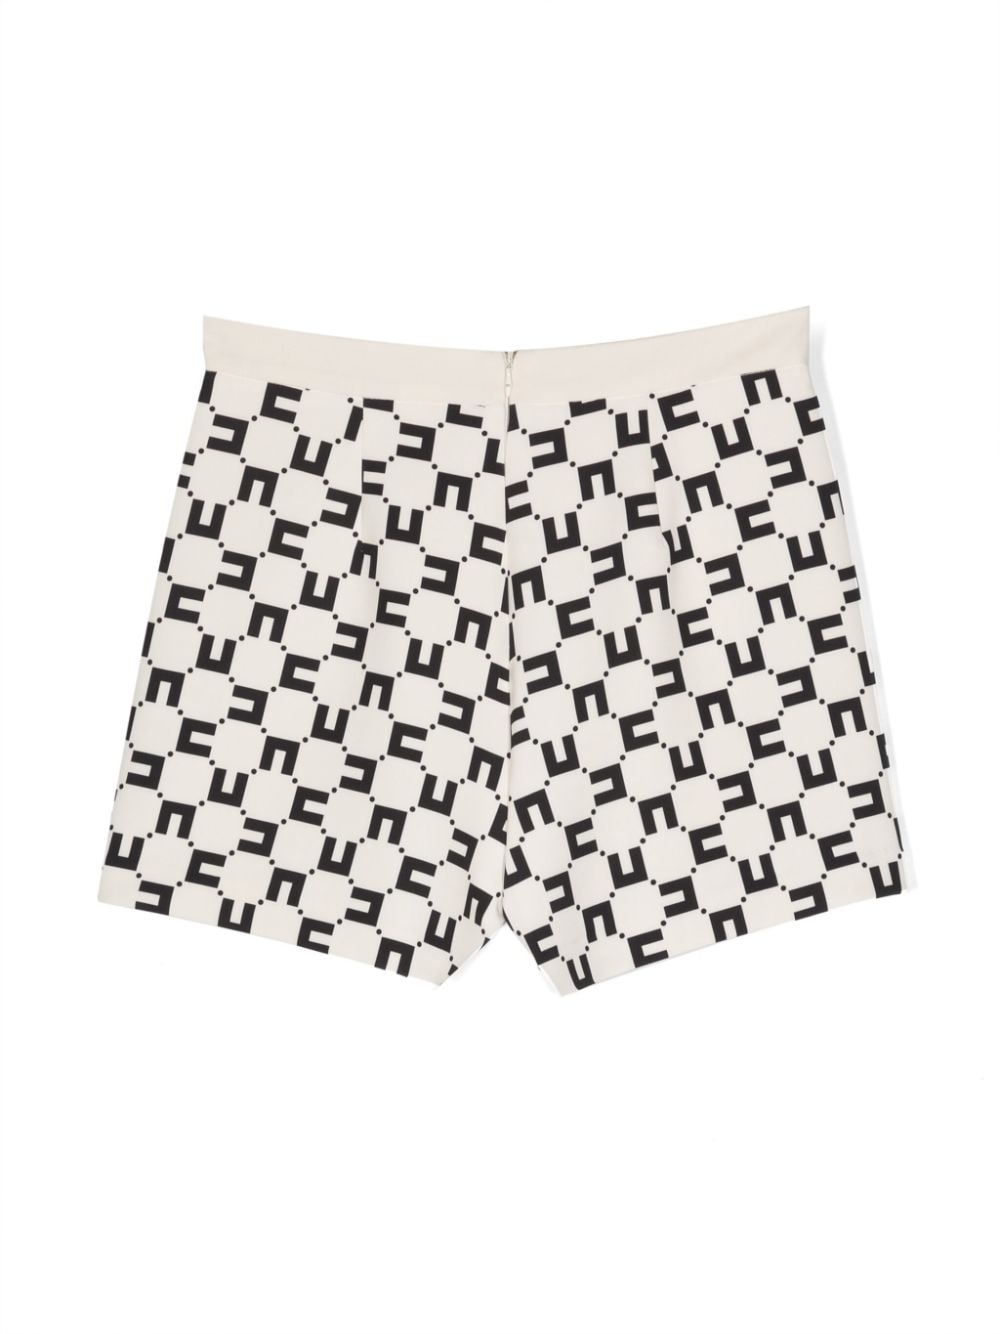 Black and white shorts for girls